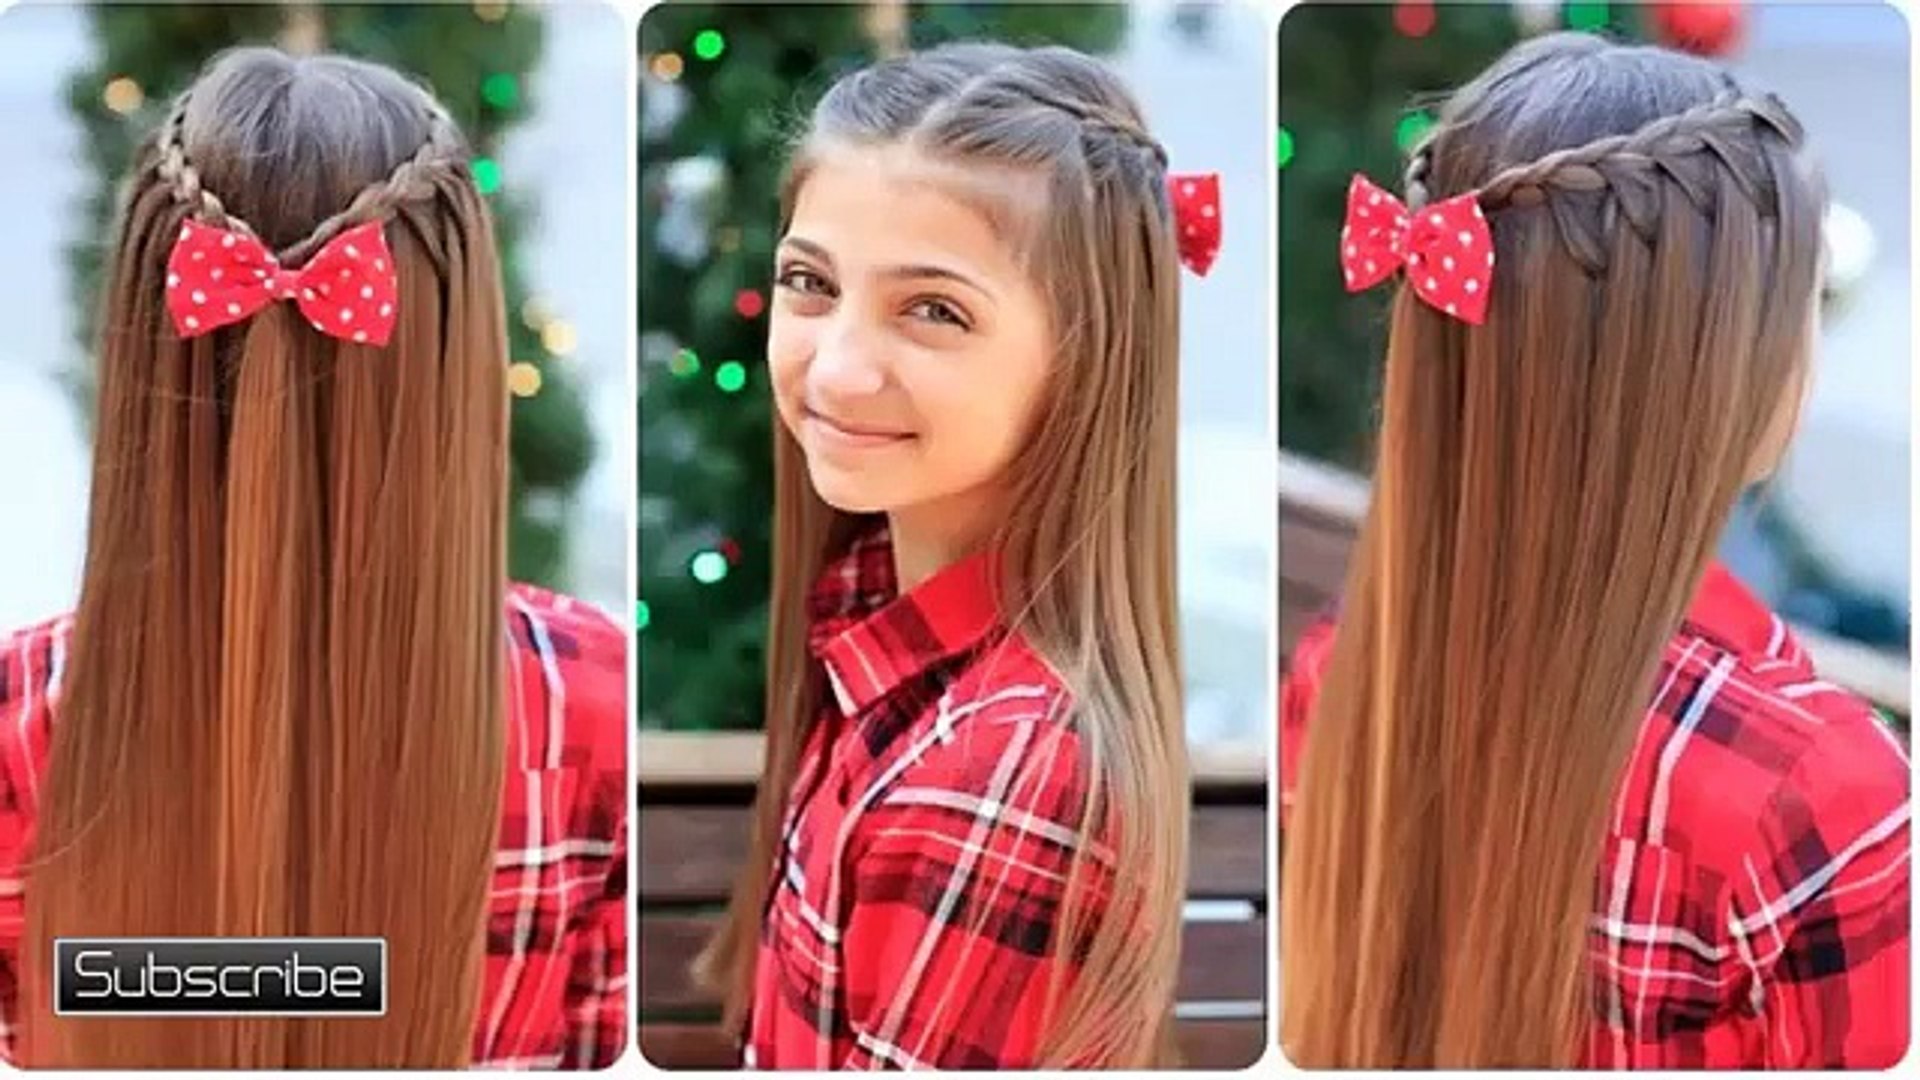 Cool Hairstyles For Girls-Simple Hairstyles - video Dailymotion